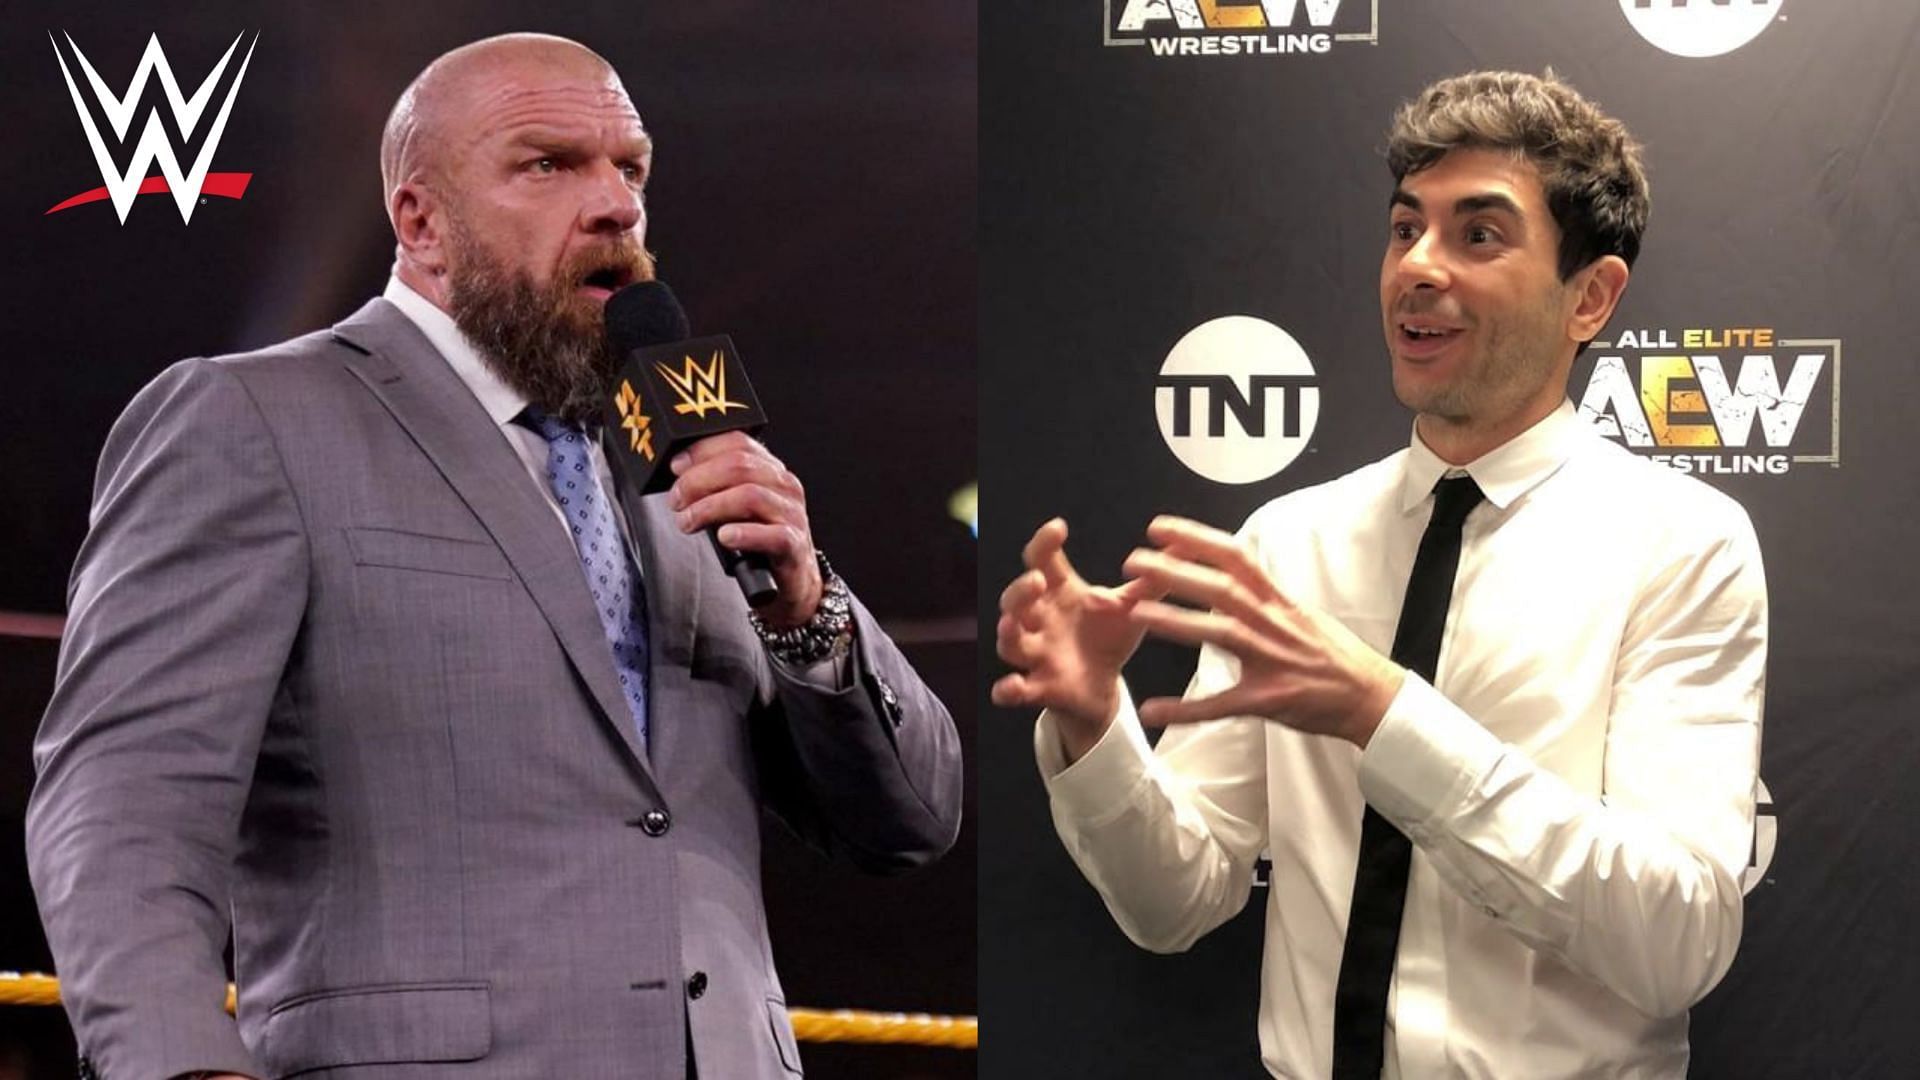 Will Triple H and WWE outperform AEW?